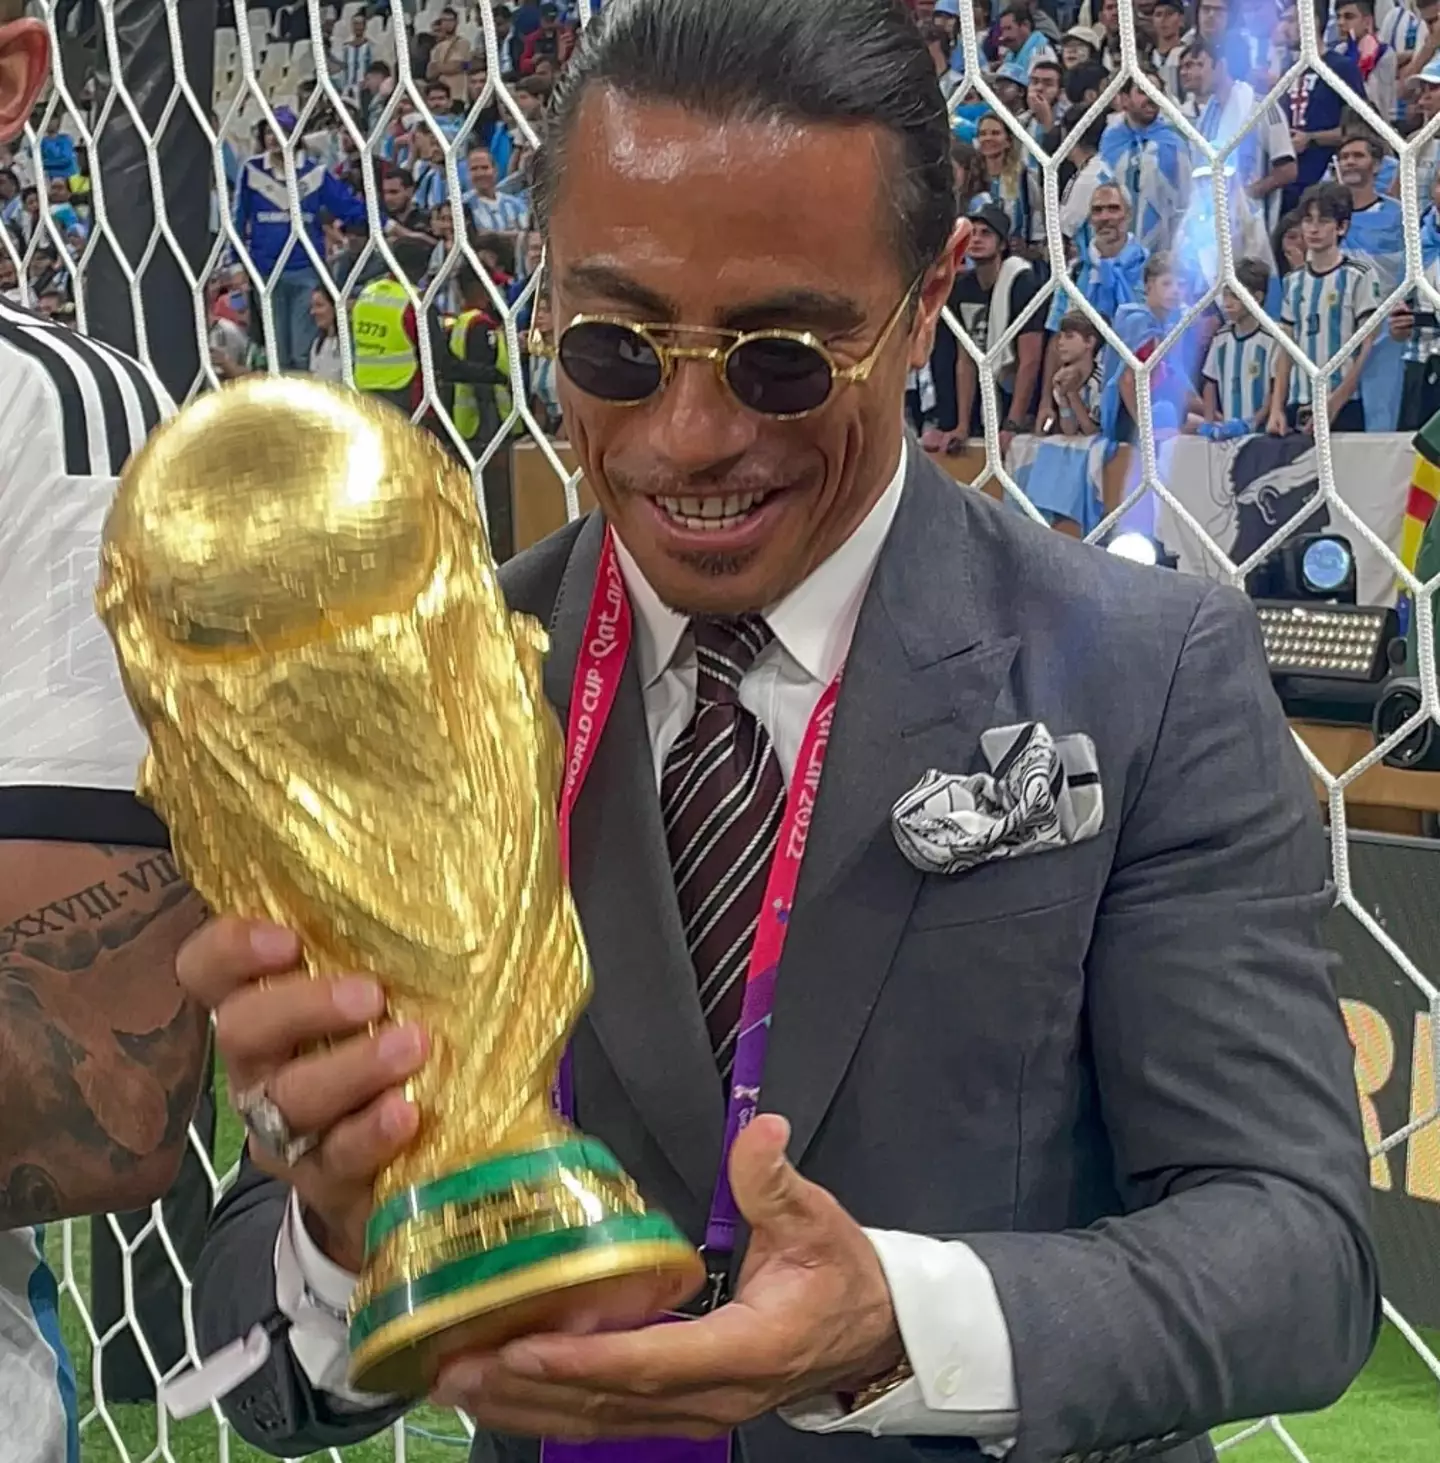 Salt Bae has been criticised after breaking a golden FIFA rule while appearing on the pitch following the World Cup final this weekend.